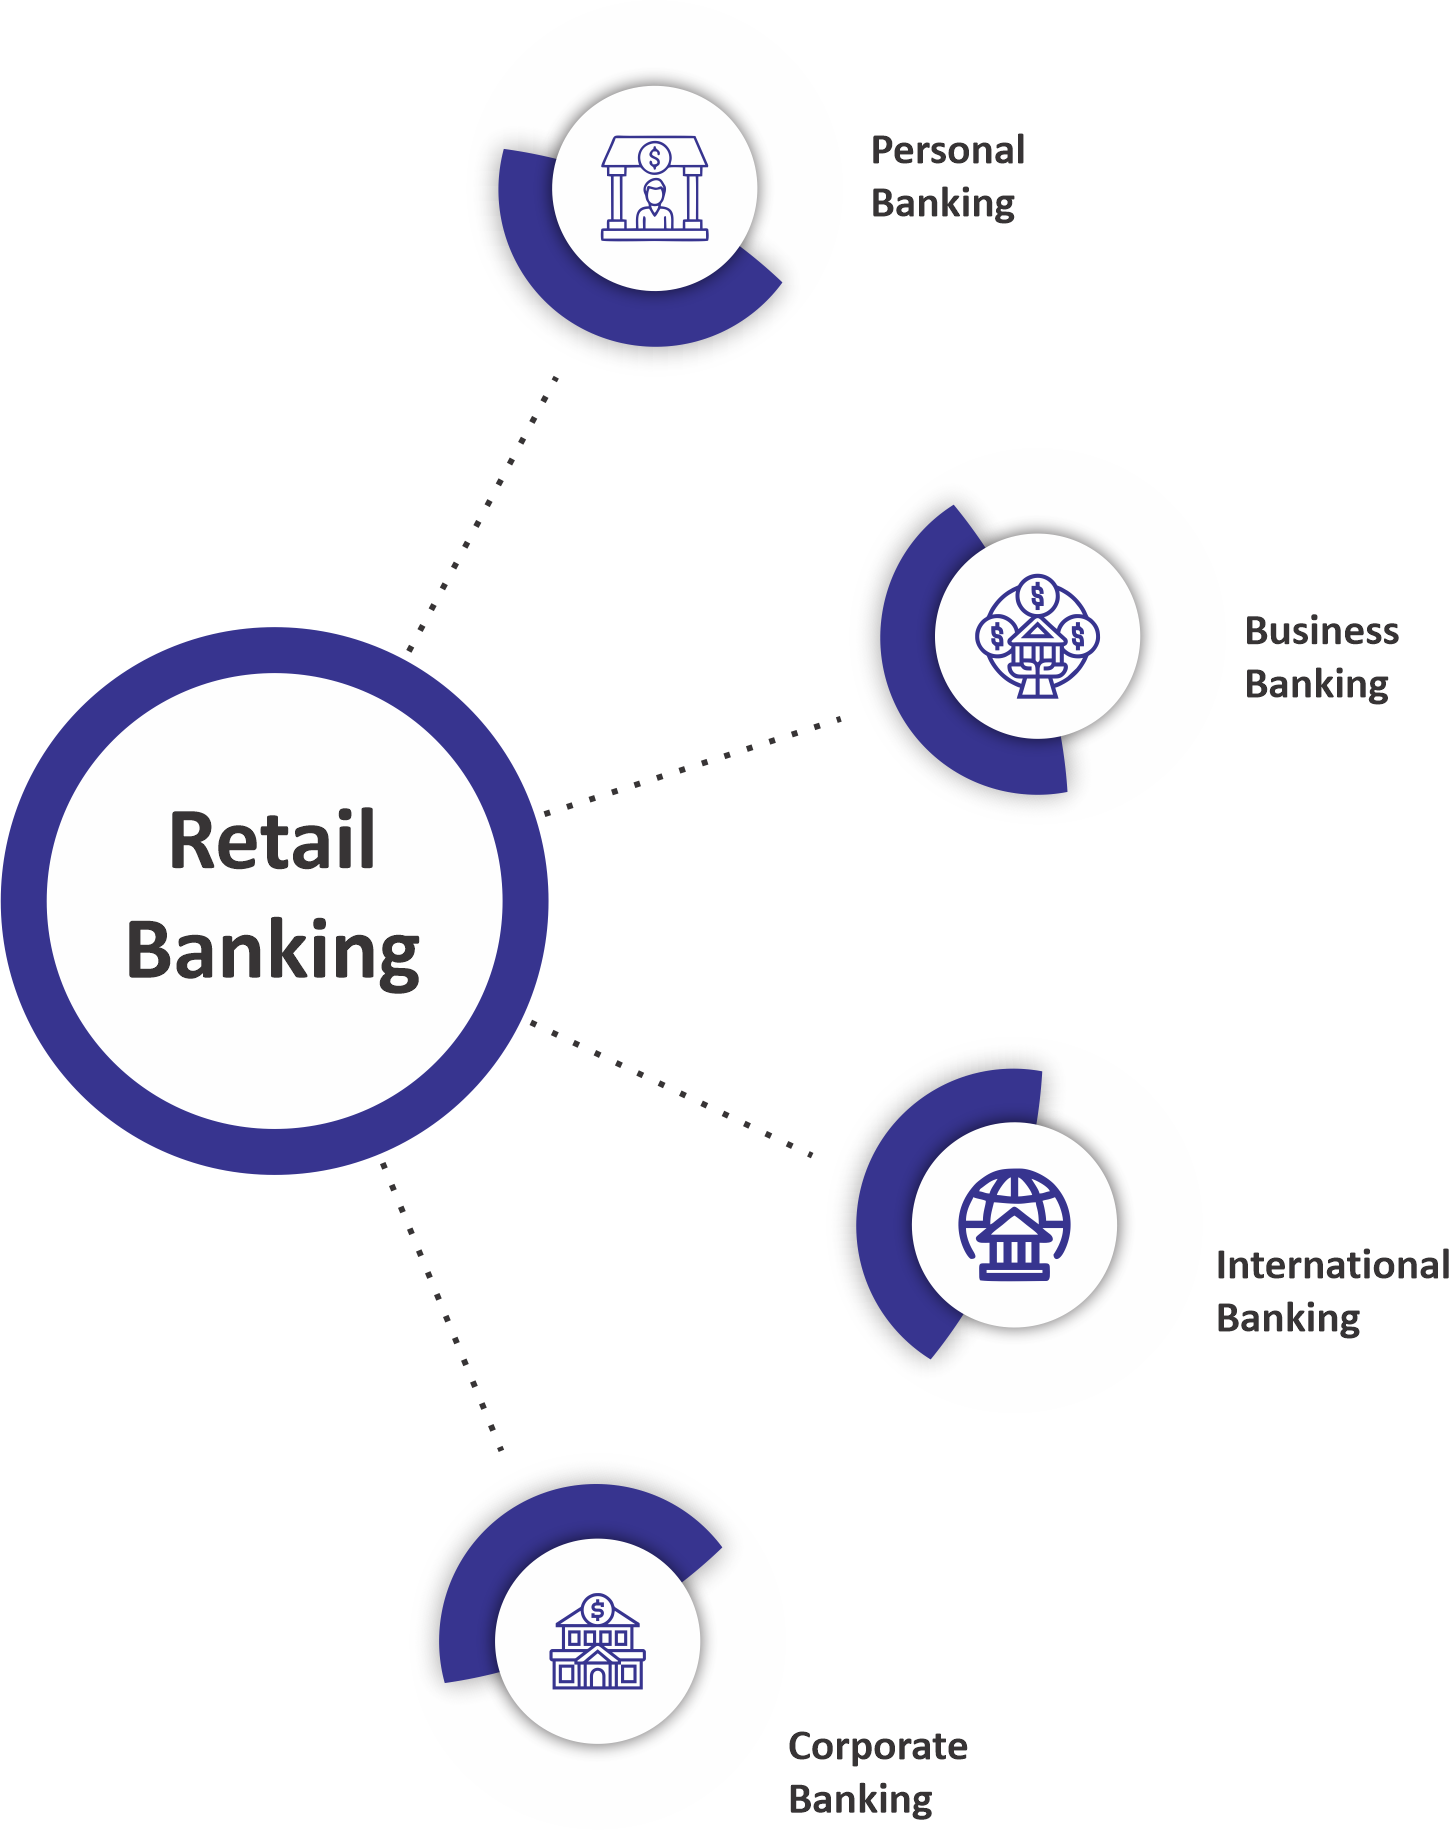 Features of Retail Banking